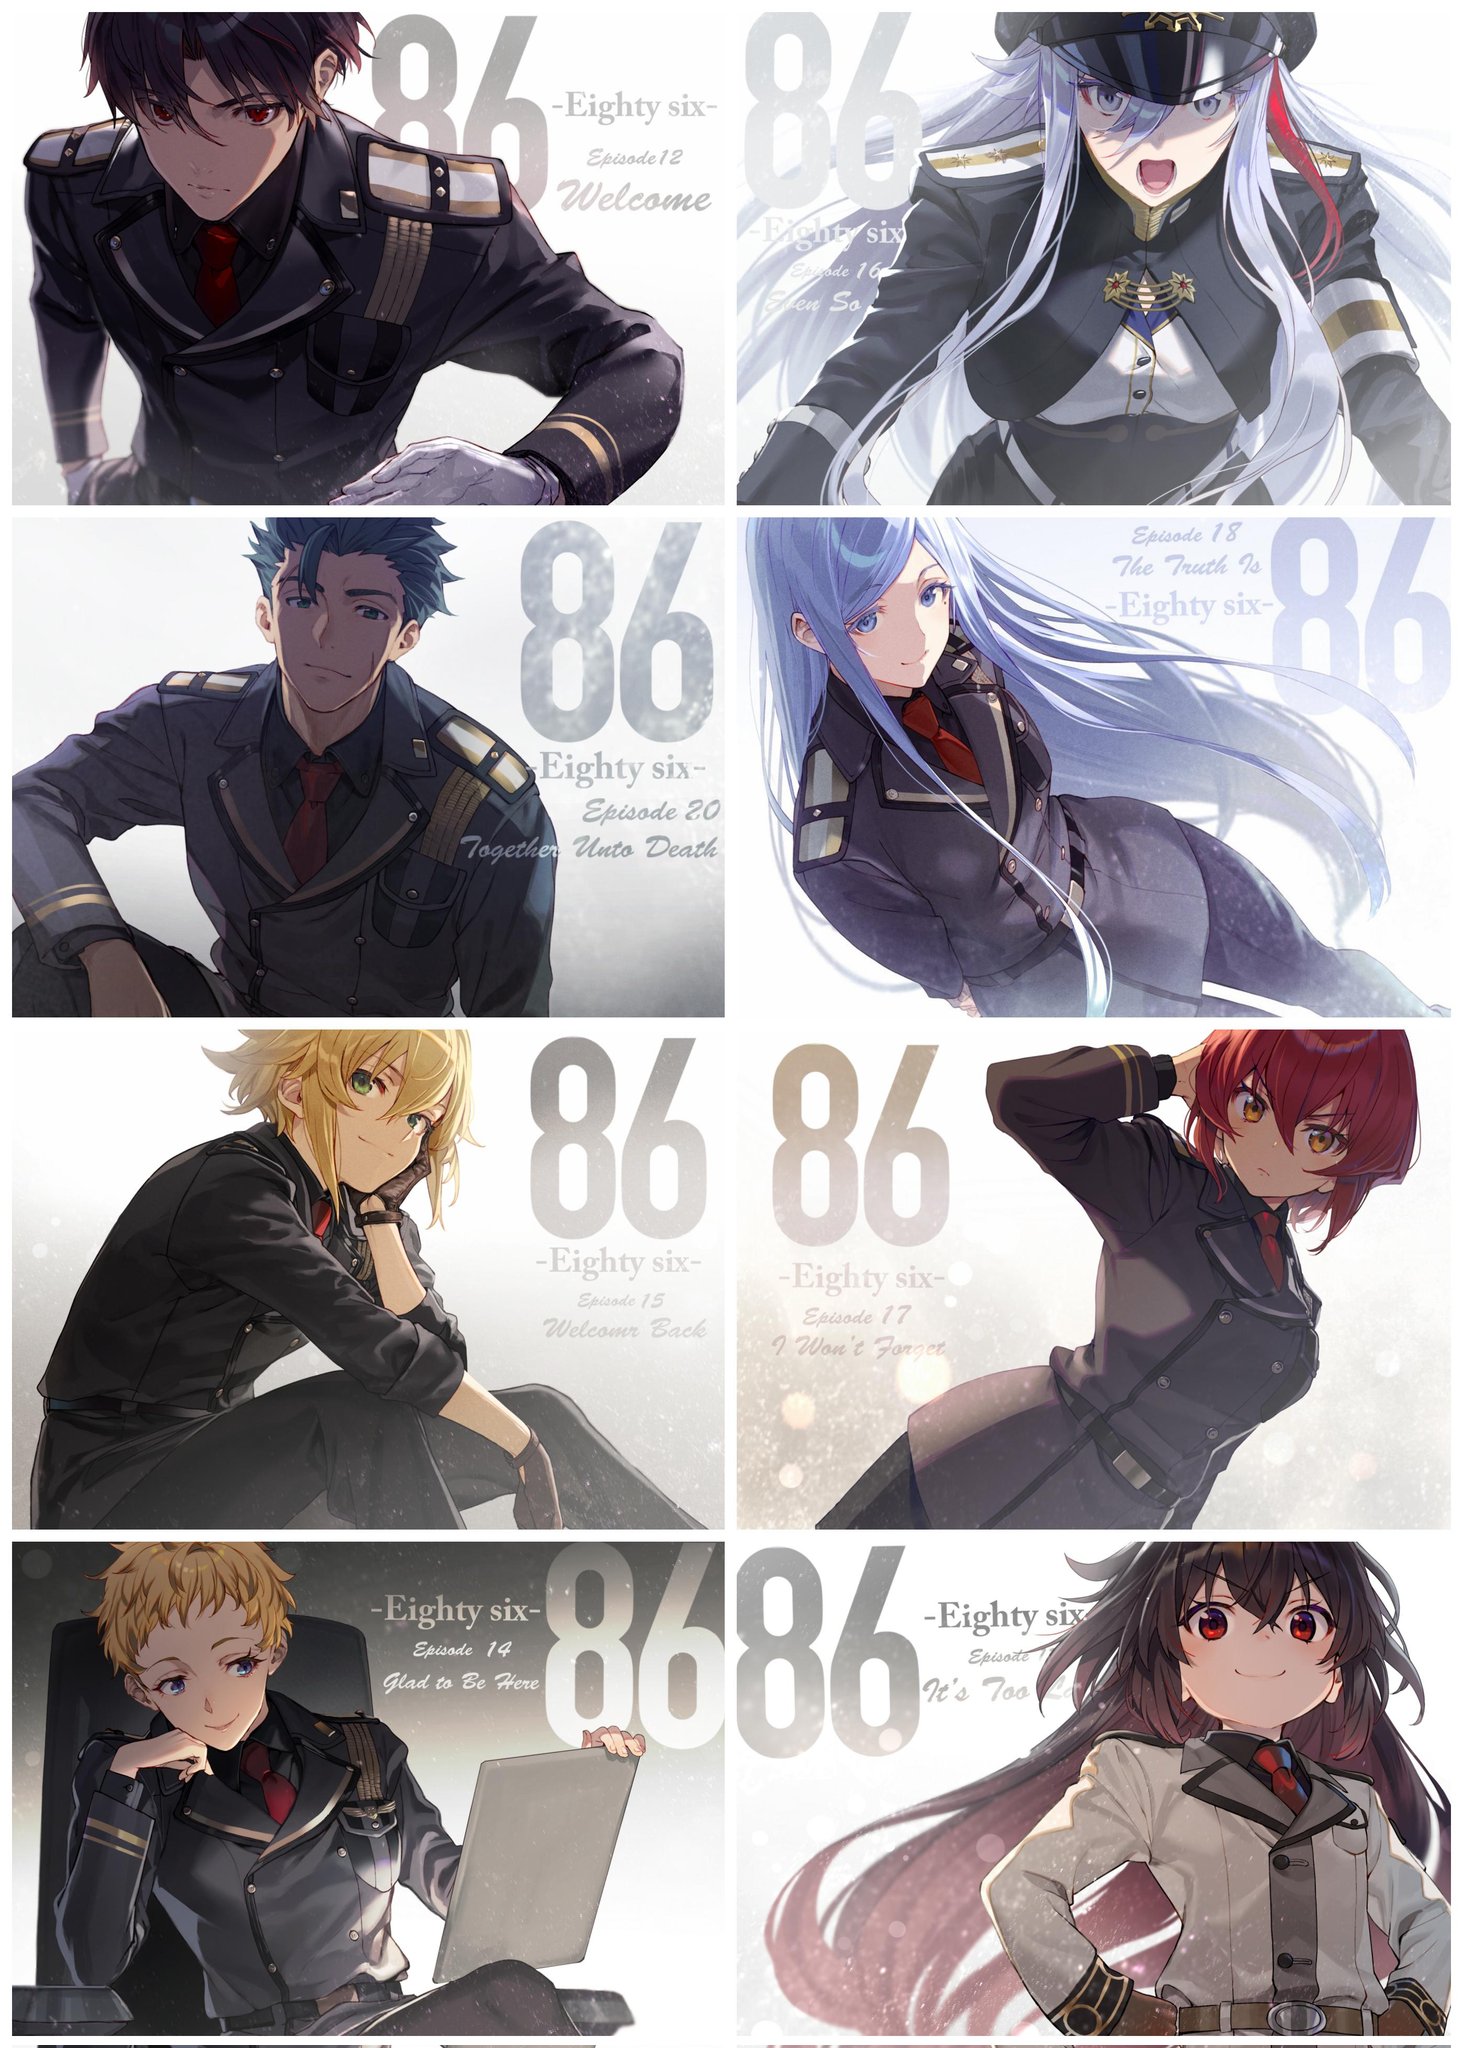 86 EIGHTY-SIX Live Reading Event Reveals Dashing Visual, More Cast